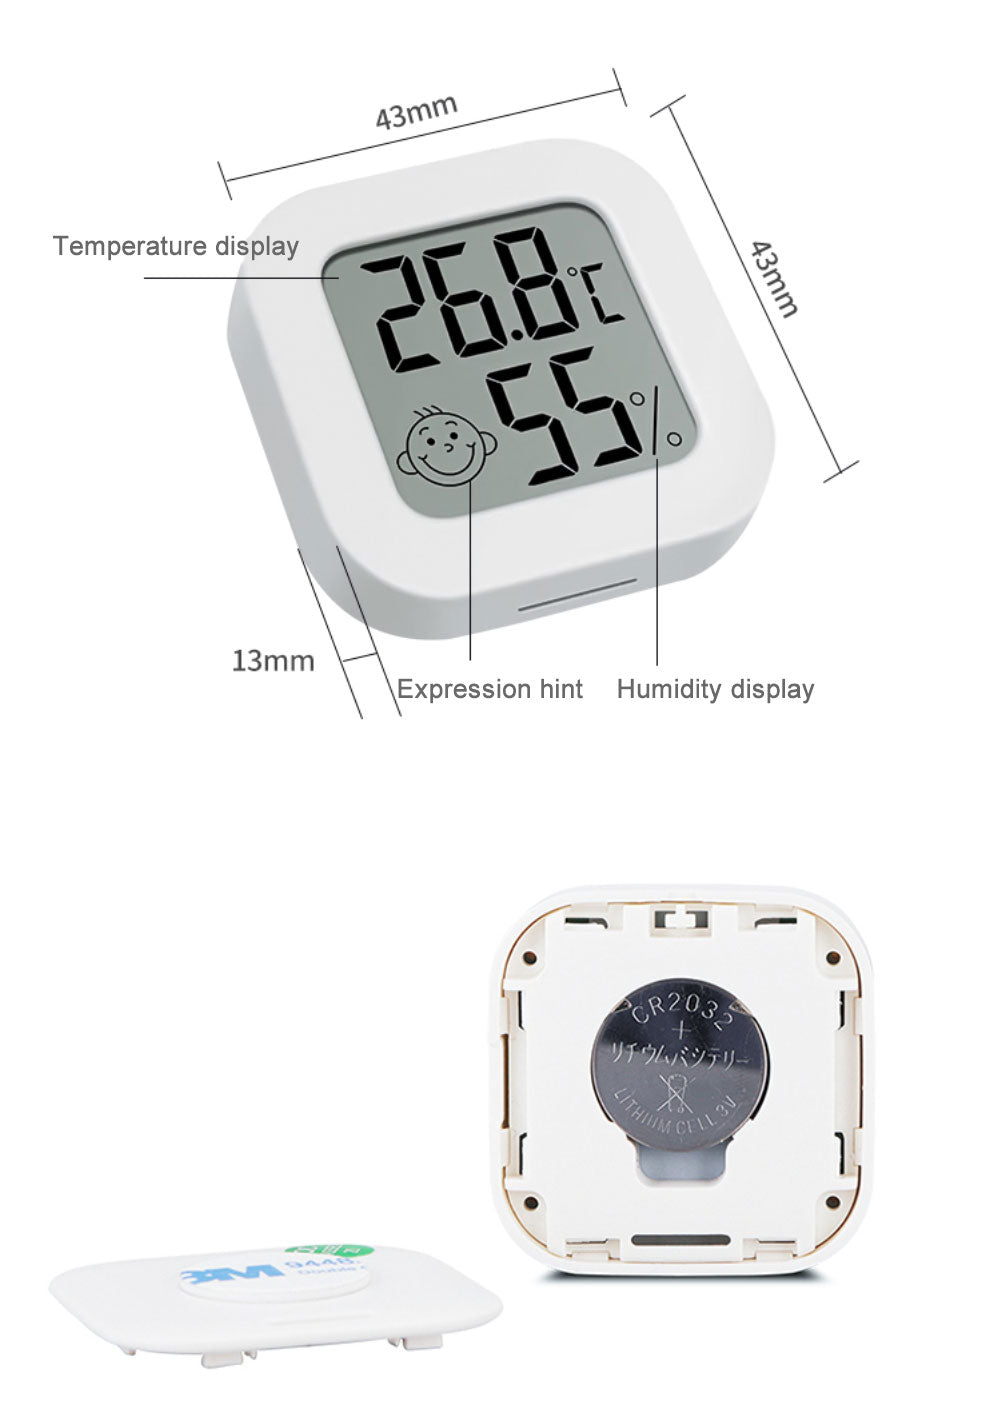 Thermometer Hygrometer Wireless Bluetooth Smart Home Temperature